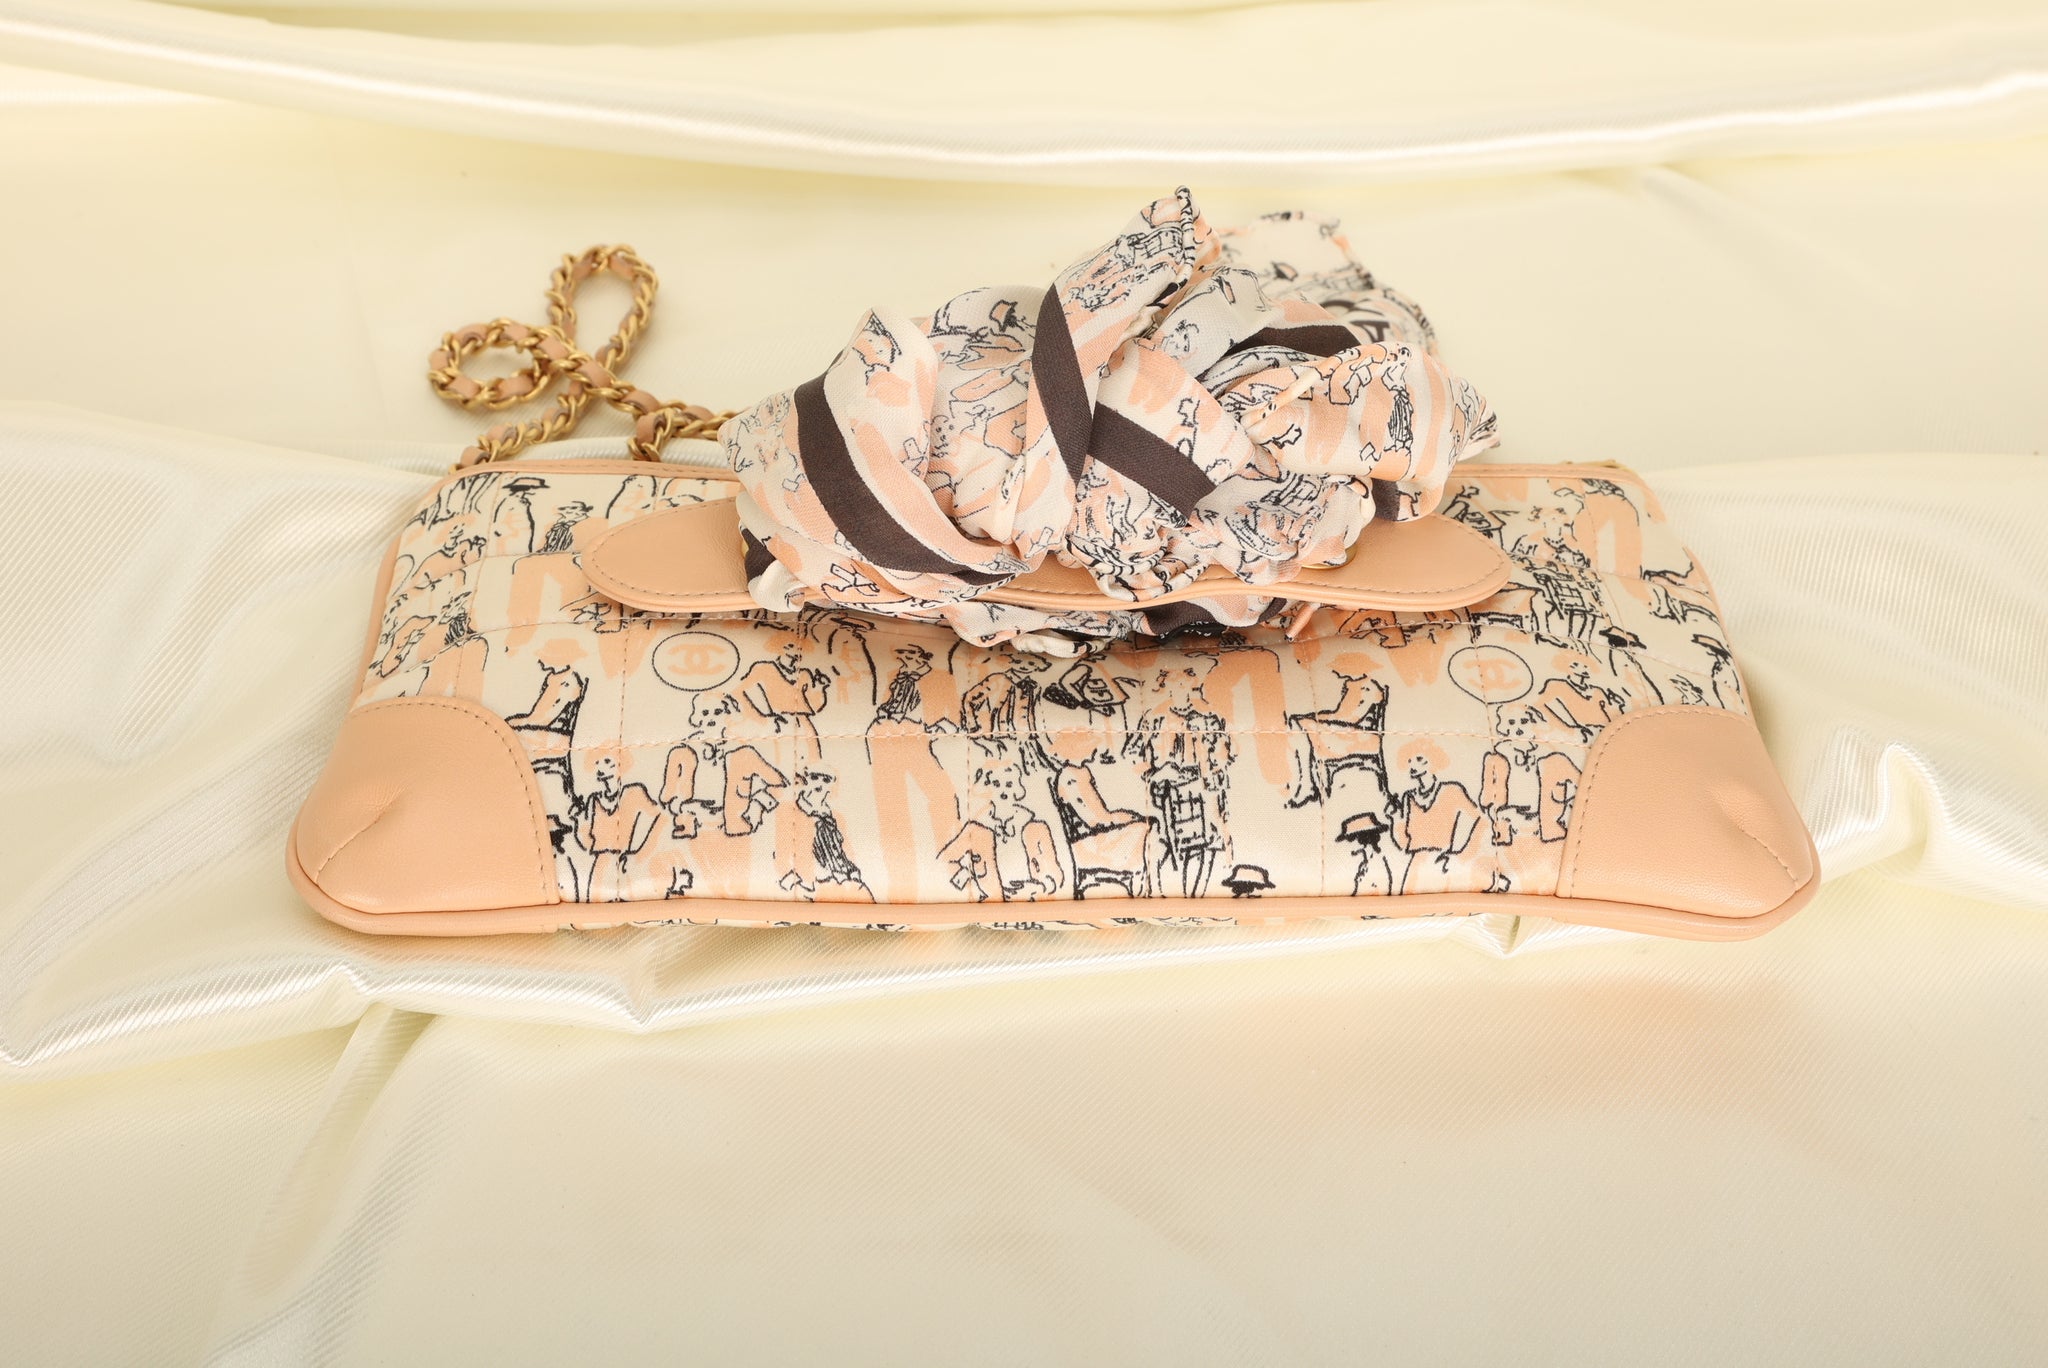 Extremely Rare Chanel Coco Mademoiselle Satin Scarf Pochette